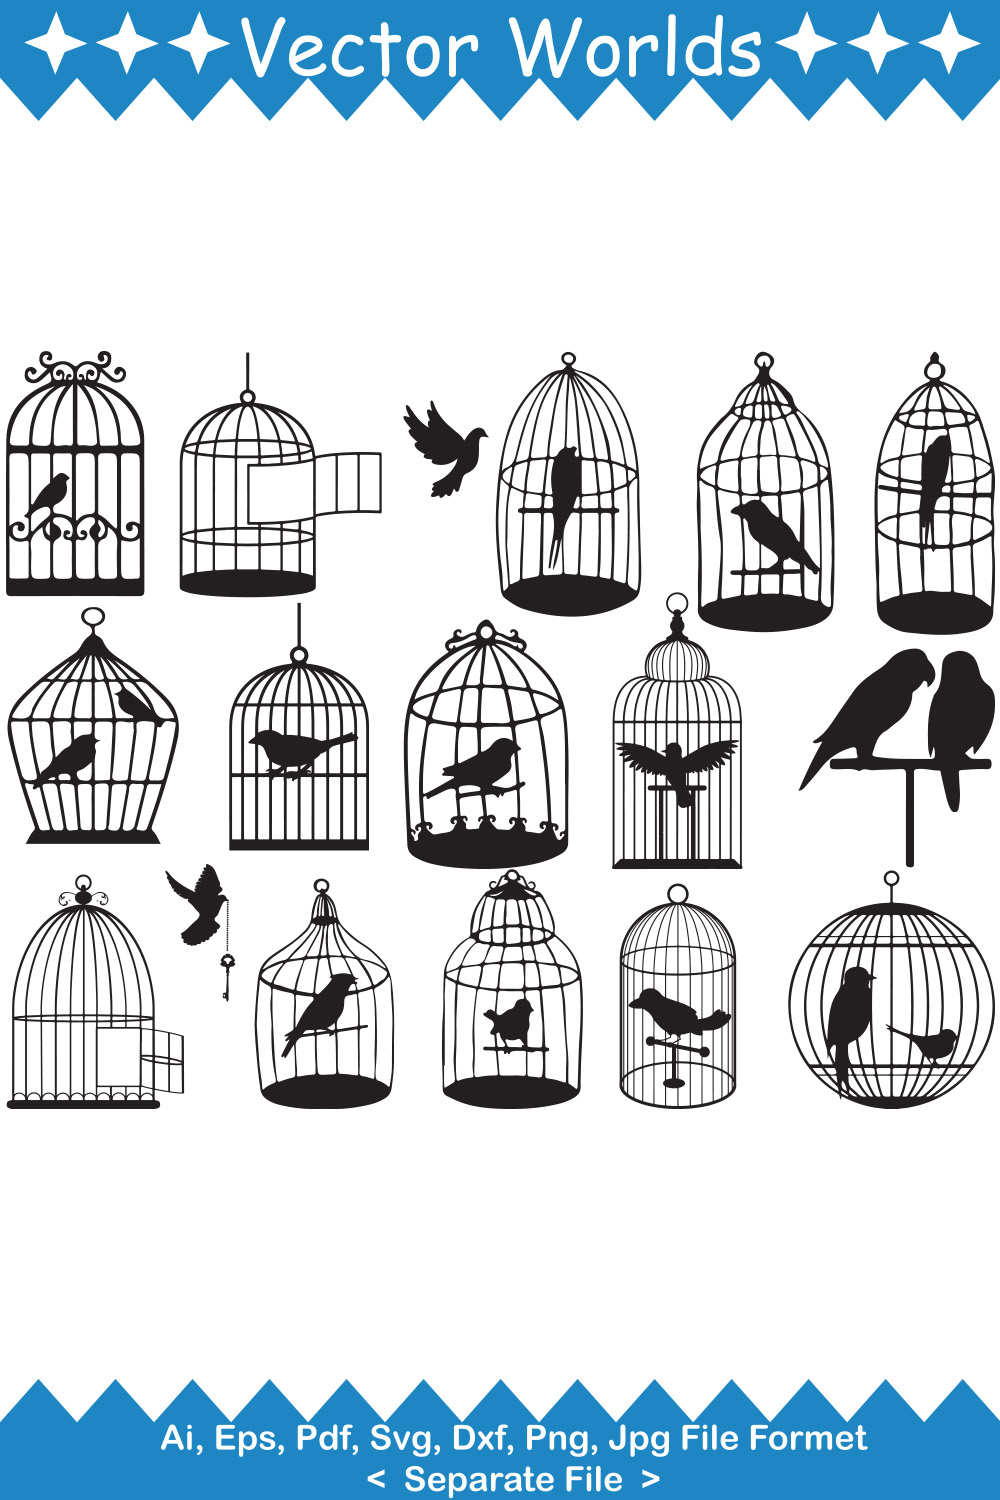 Bunch of birds in cages with stars.